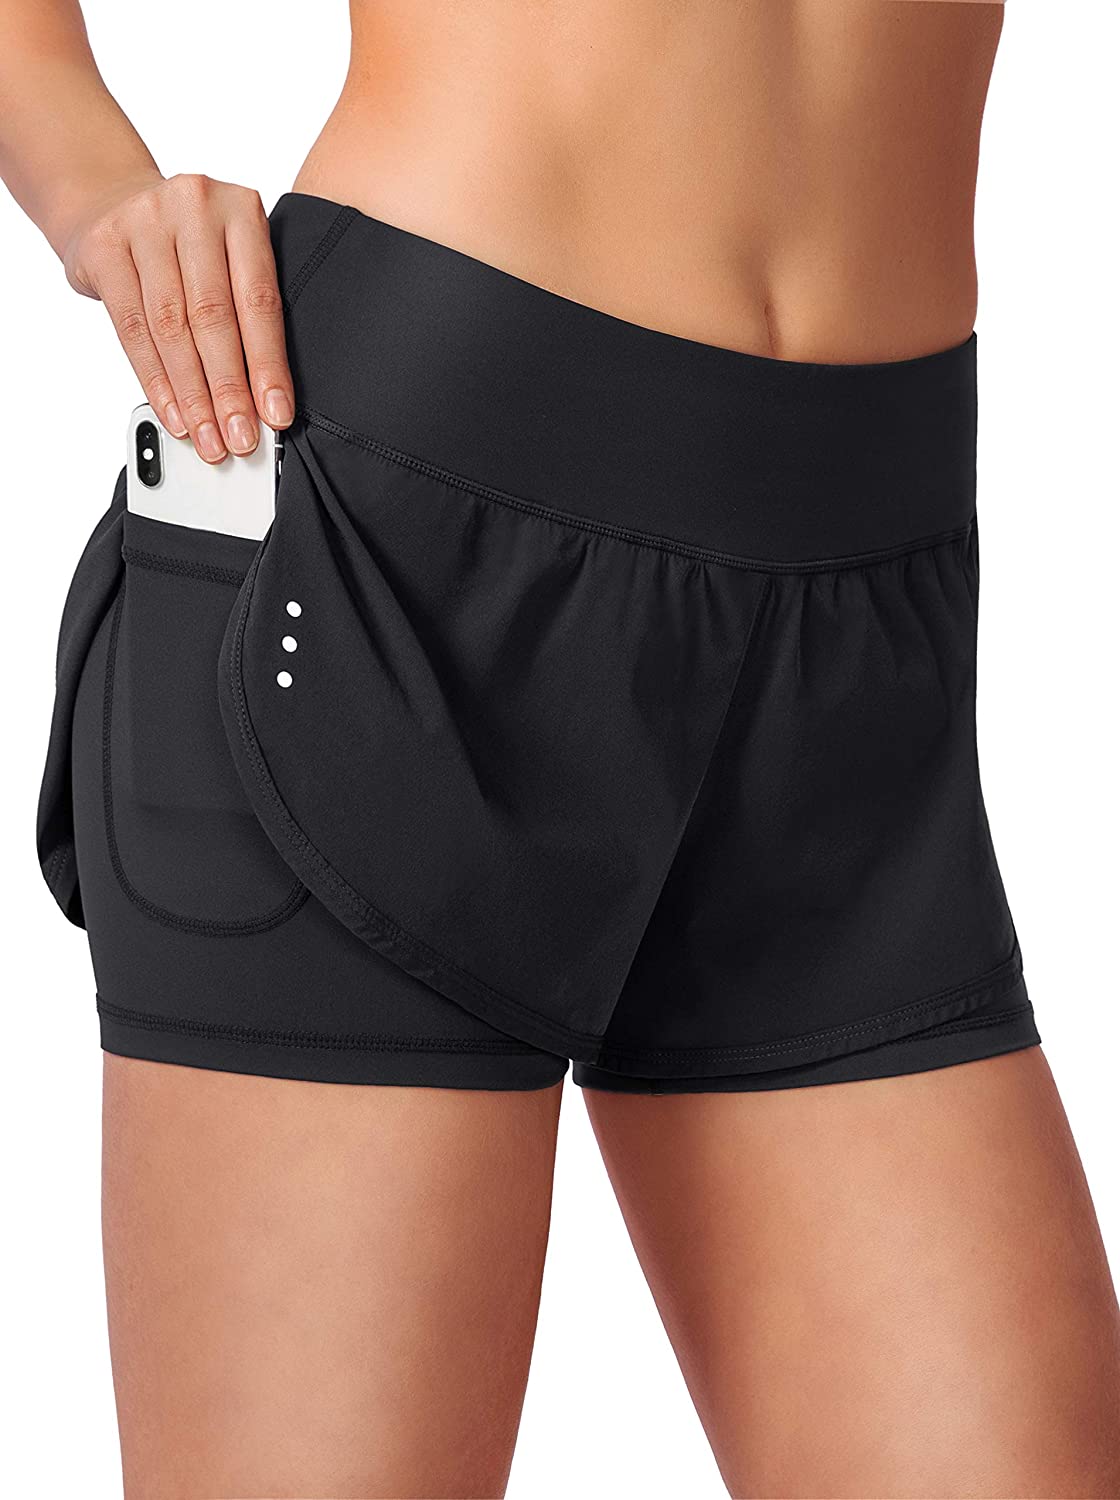 LABEYZON Women's 2 in 1 Running Shorts Workout Athletic Gym Sports Yoga Shorts with Phone Pockets 